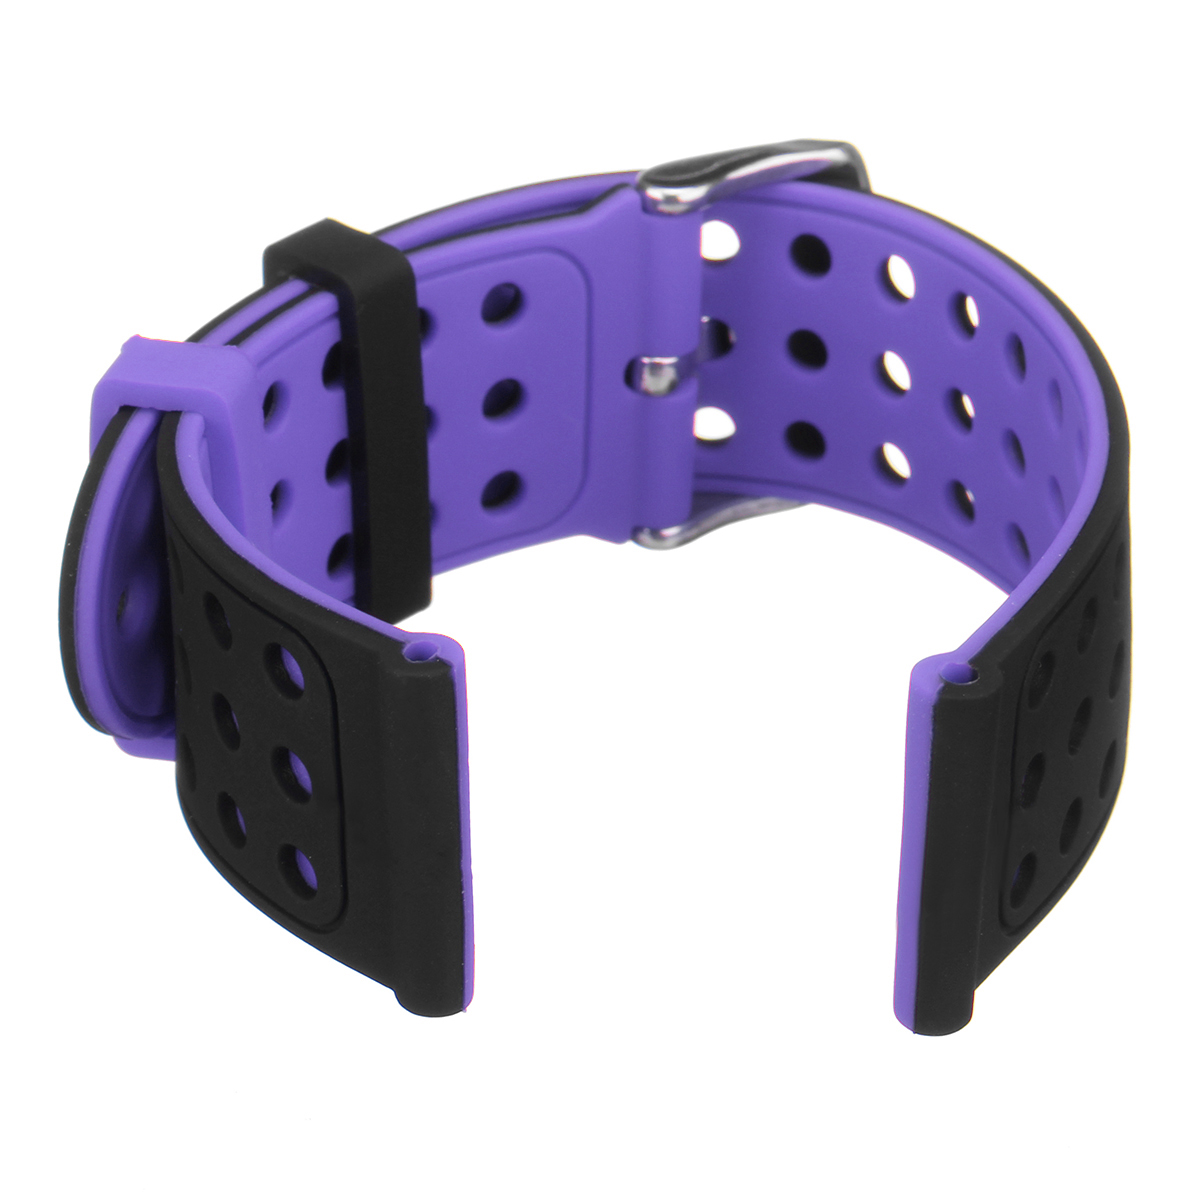 Bakeey-Replacement-Silicone-Rubber-Classic-Smart-Watch-Band-Strap-For-Fitbit-Versa-1345134-9